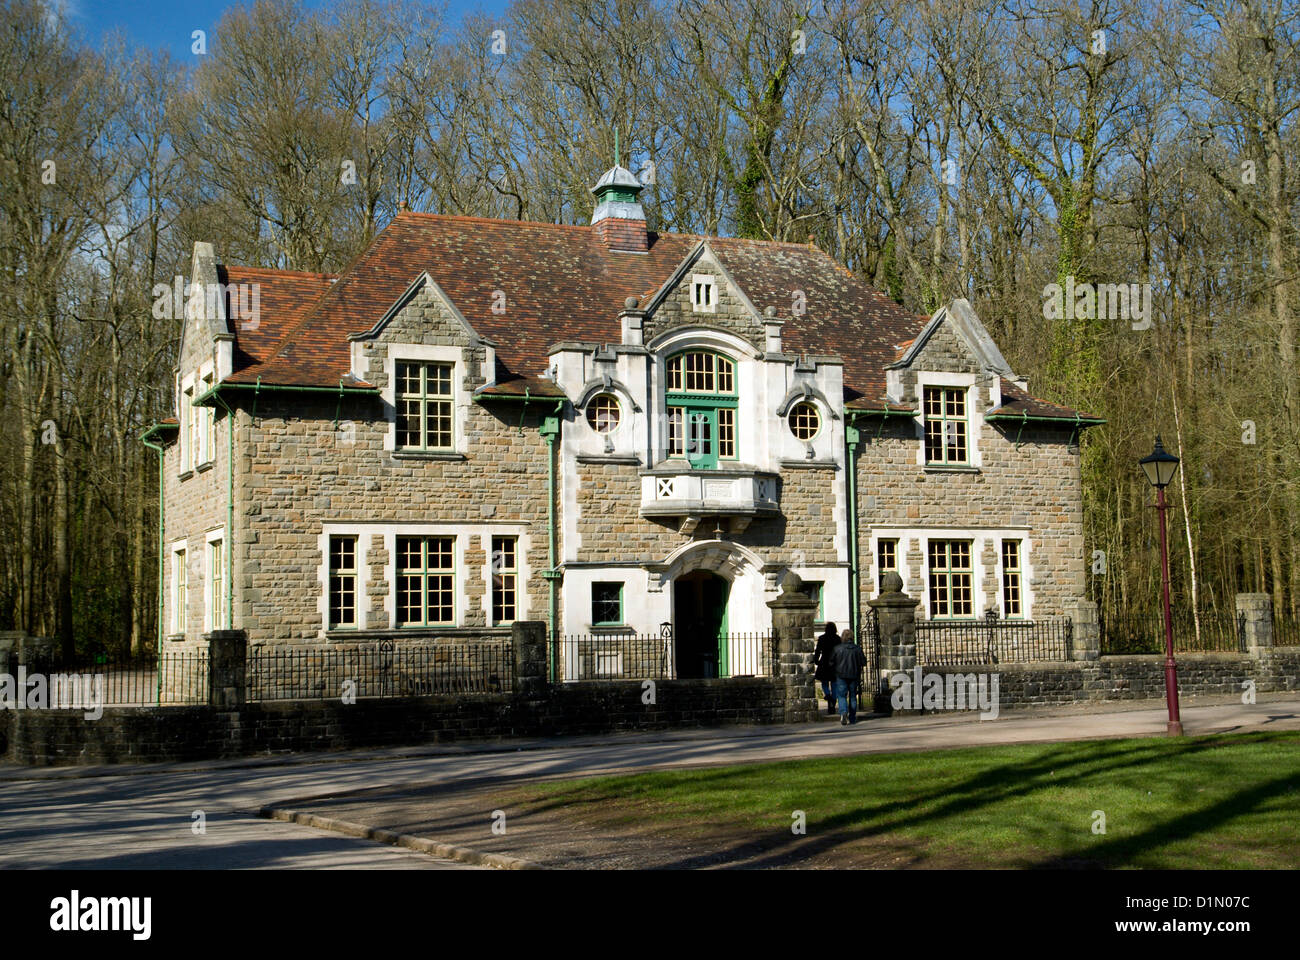 Oakdale Workmens Institute, National History Museum, St Fagans, Cardiff, Südwales. Stockfoto